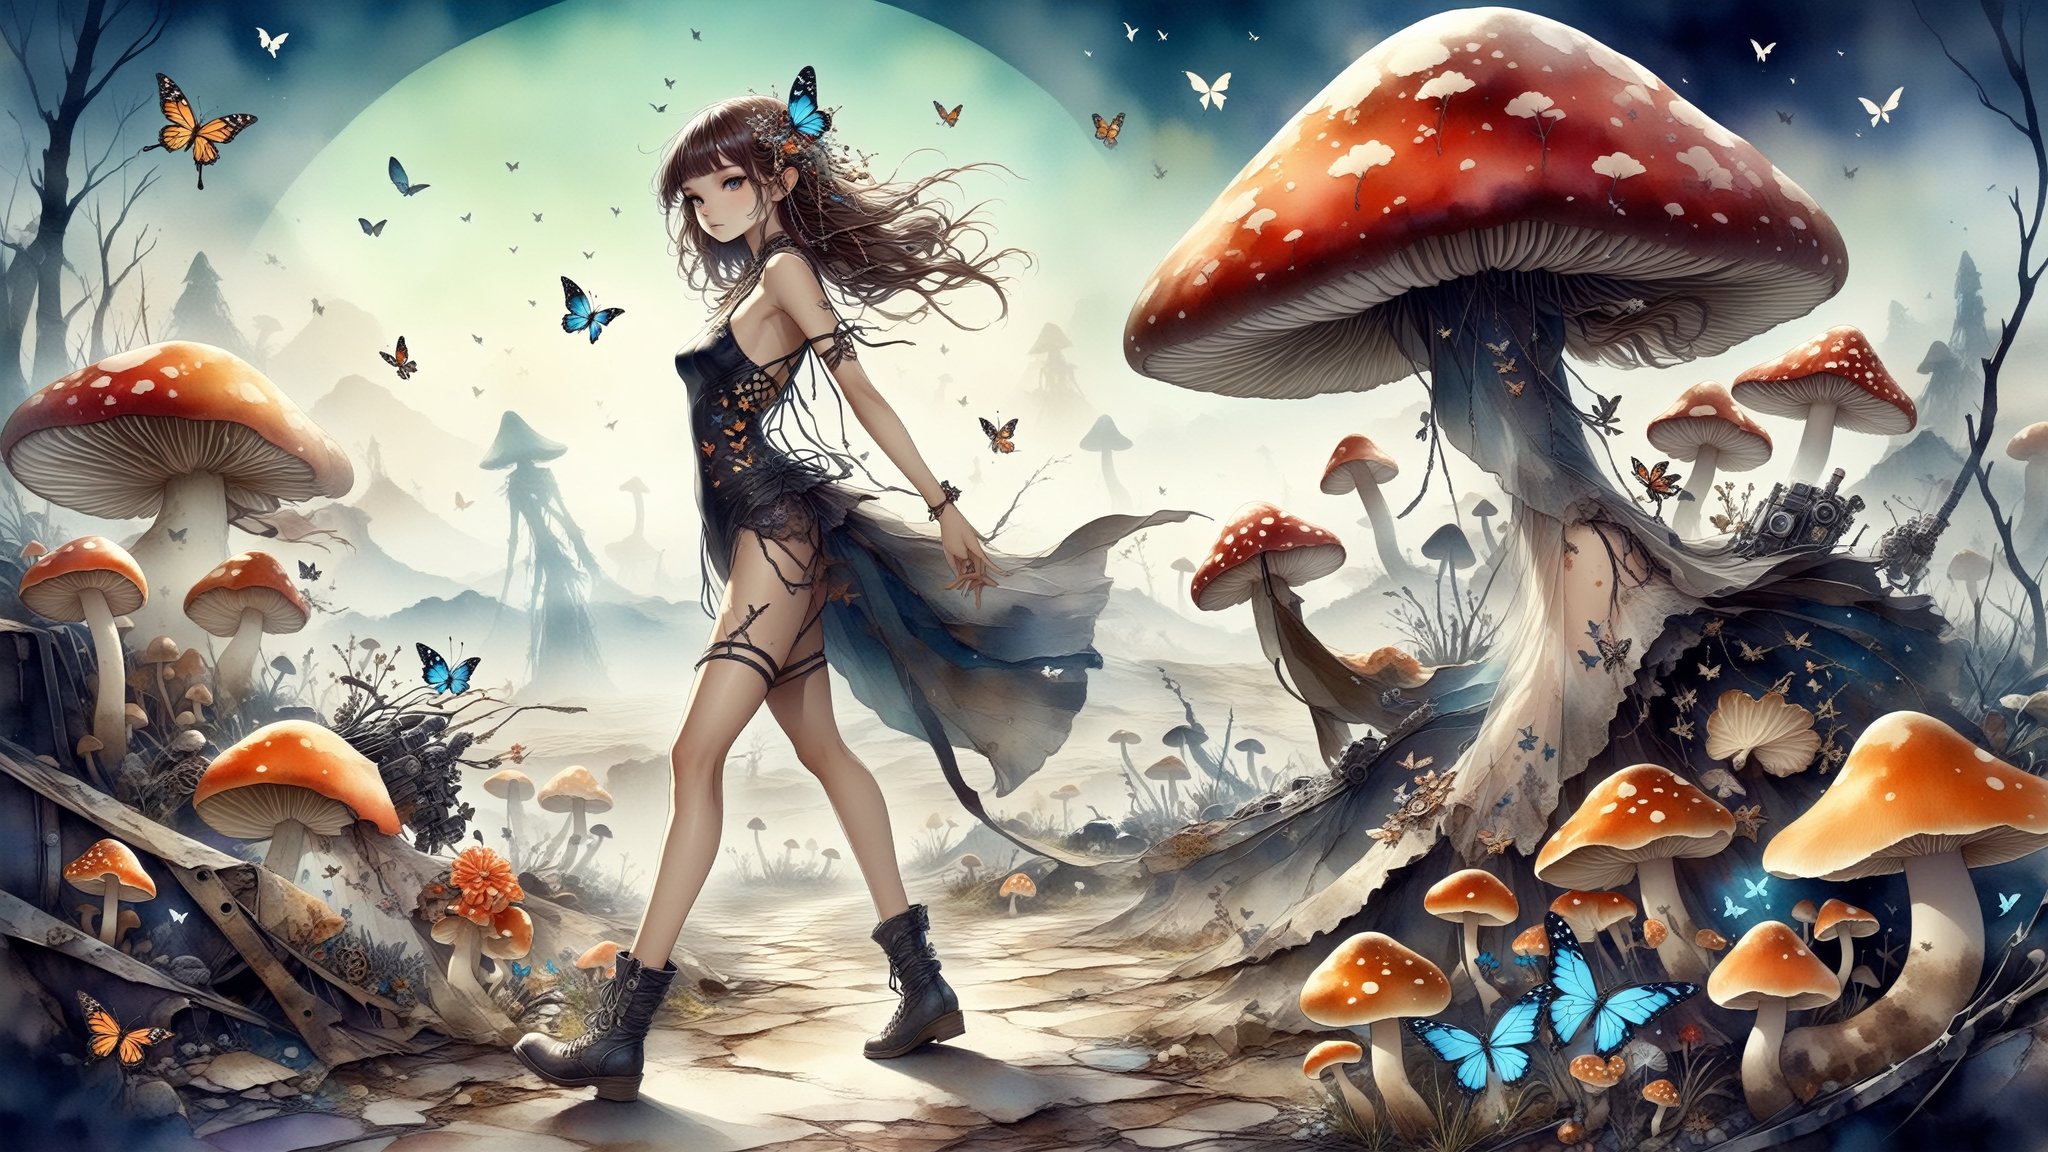 Groundcore, Orientalism ,cute alien_girl, Looking Back , ((Sexy Clothing)), realistic, Walking in a strutting pose,Mushrooms , Butterflies, masterpiece, best quality, aesthetic, Create an image using junk art elements, with repurposed materials, found objects, and a sense of resourcefulness and creativity,Decora_SWstyle,watercolor,Devasted landscape 